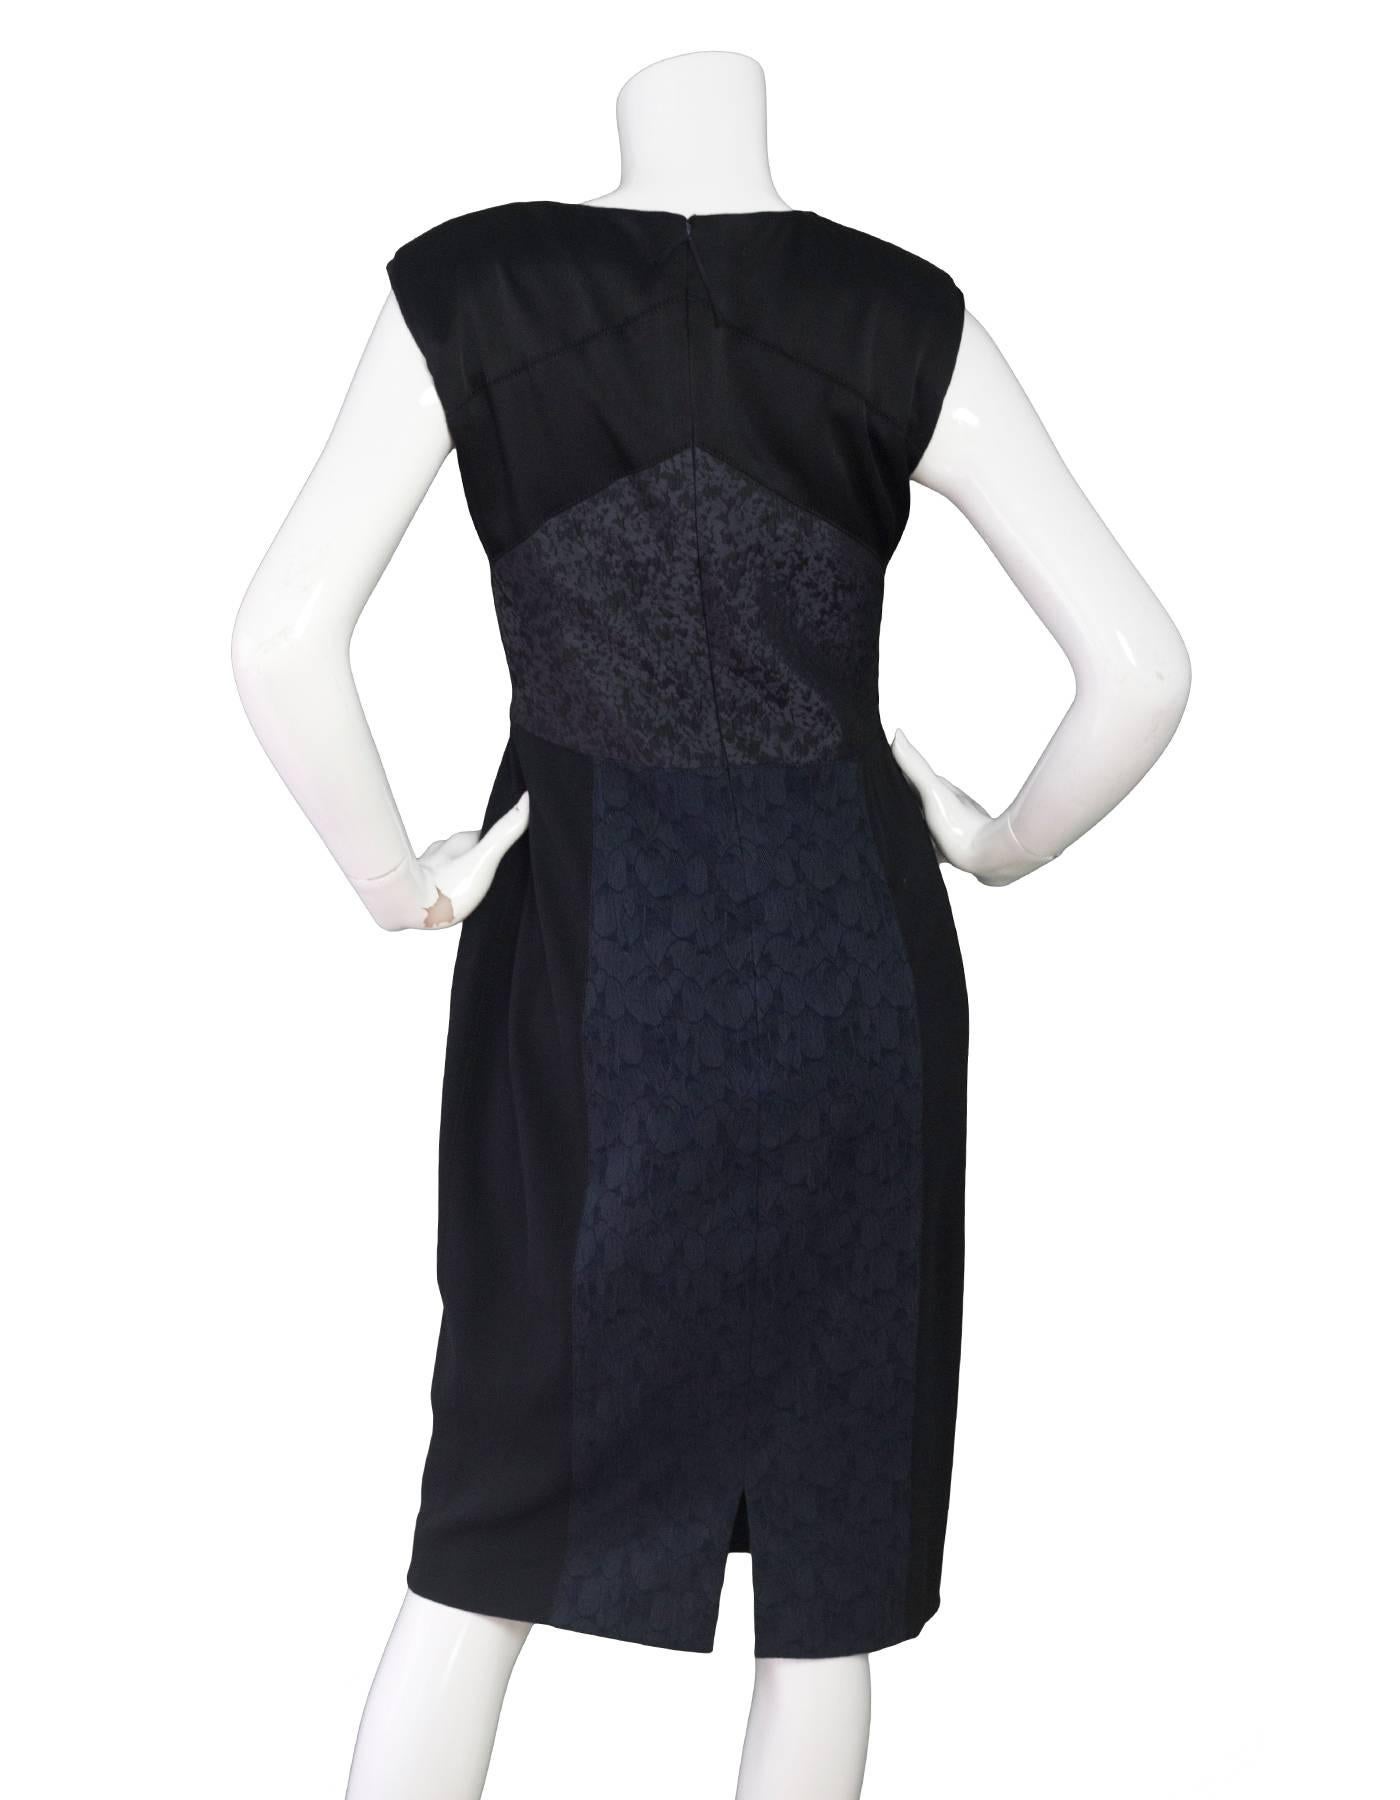 J. Mendel Black & Navy Print Dress Sz 6 In Excellent Condition In New York, NY